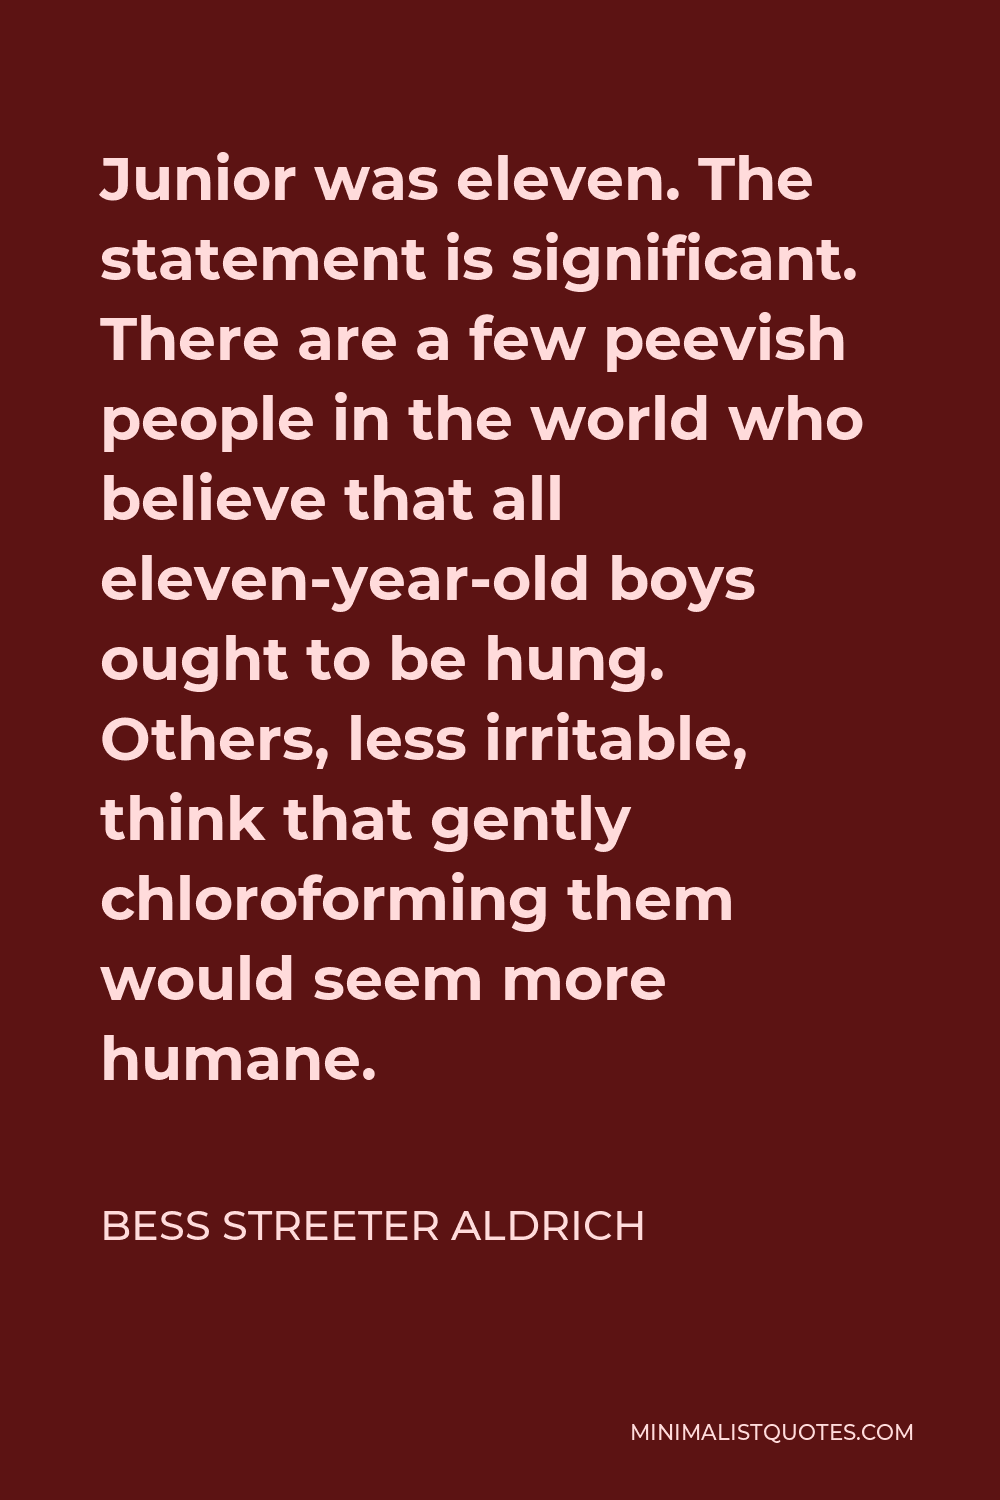 Bess Streeter Aldrich Quote - Junior was eleven. The statement is significant. There are a few peevish people in the world who believe that all eleven-year-old boys ought to be hung. Others, less irritable, think that gently chloroforming them would seem more humane.